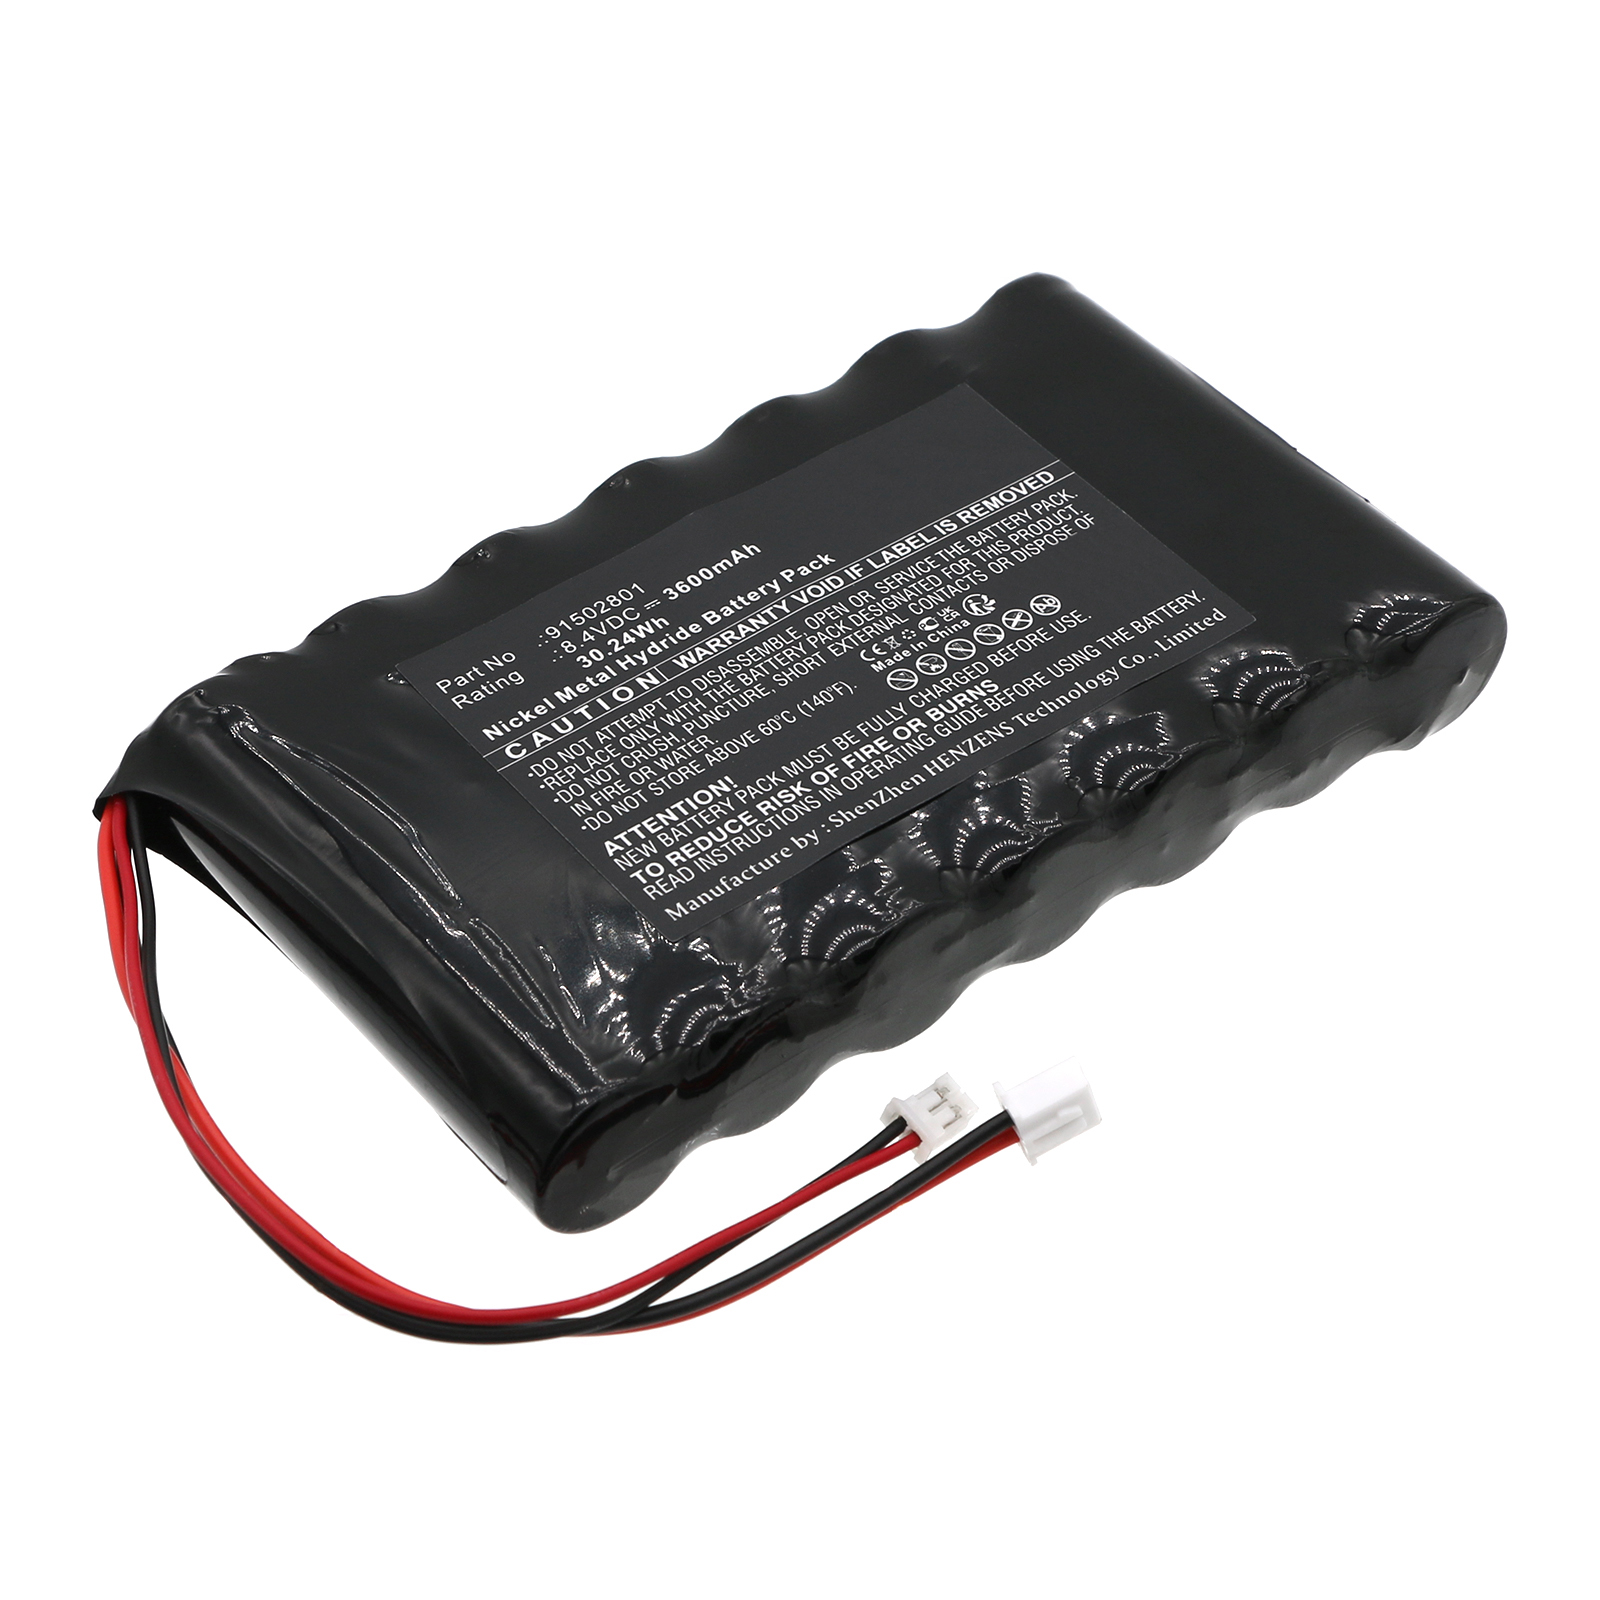 Synergy Digital Equipment Battery, Compatible with Technisat 91502801 Equipment Battery (Ni-MH, 8.4V, 3600mAh)